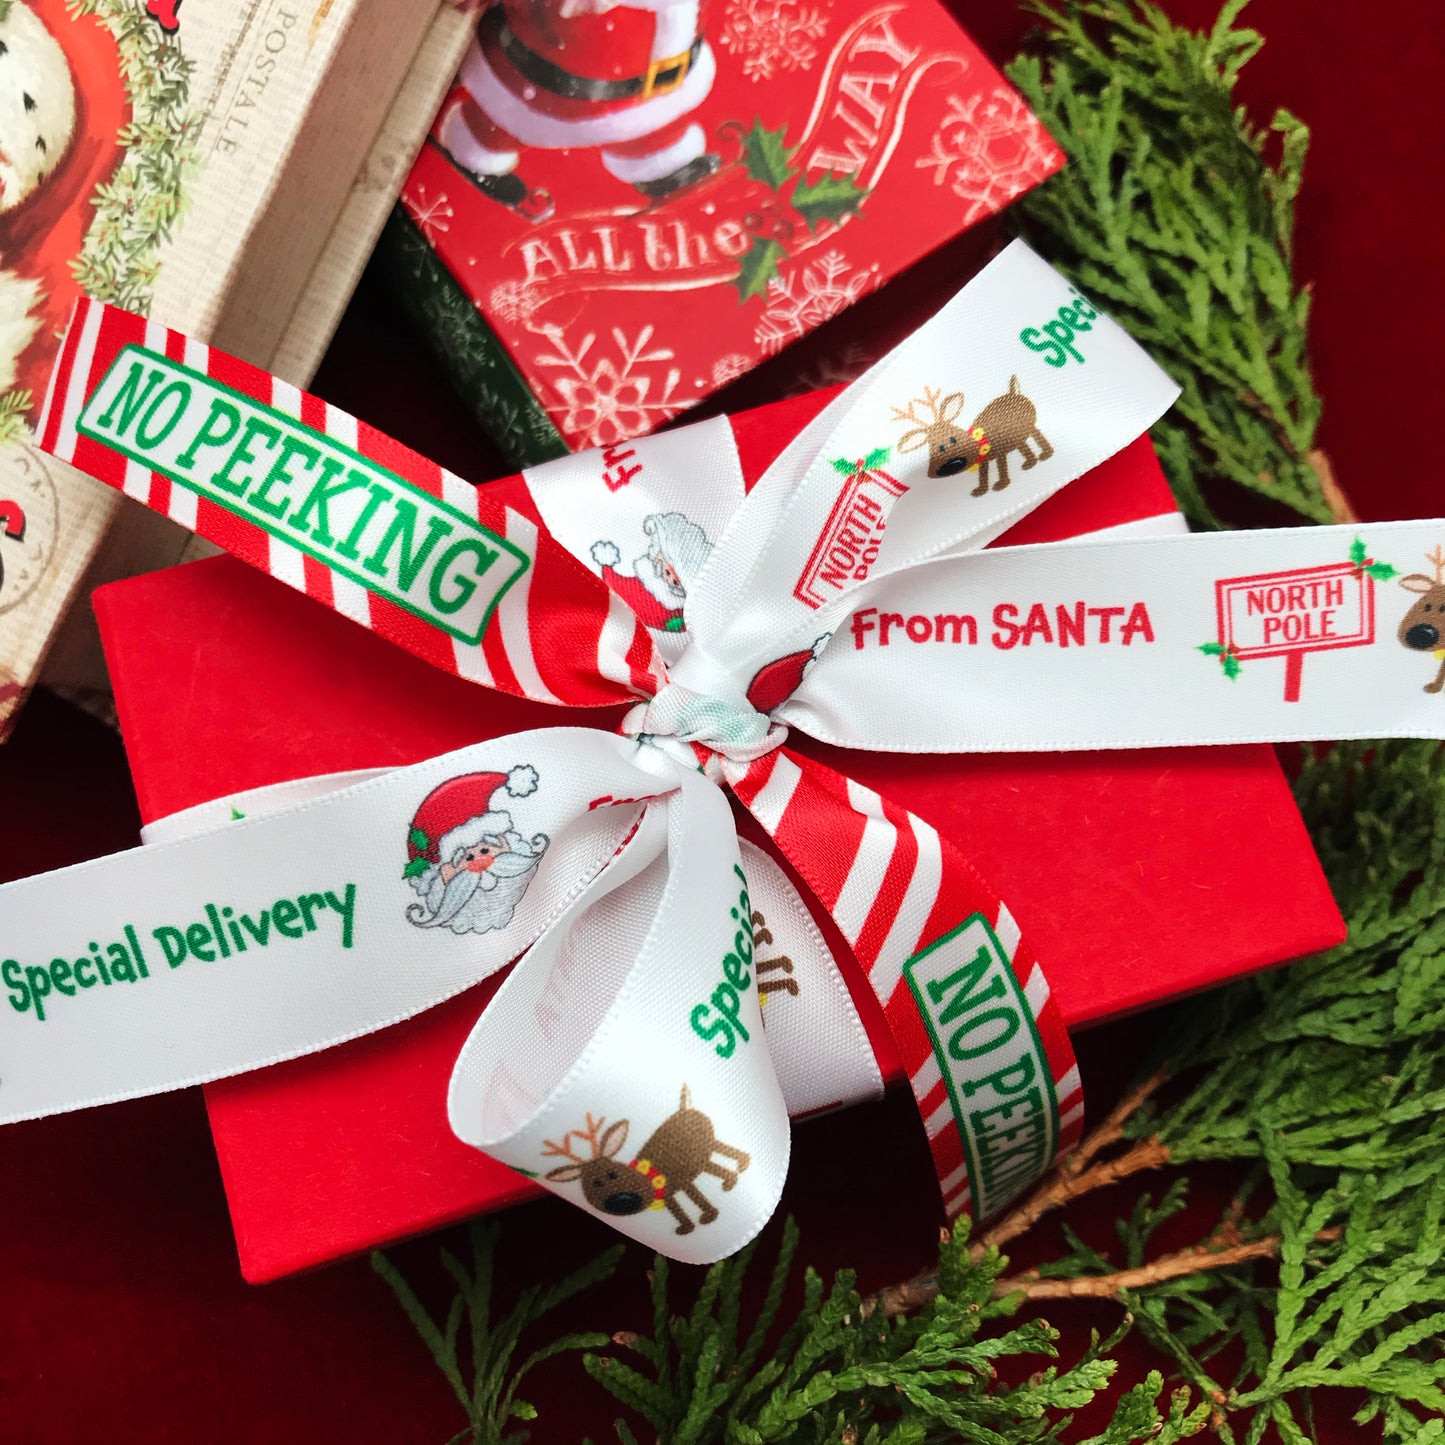 No Peeking! Christmas Ribbon in green with red and white stripes printed on 5/8" White SFS